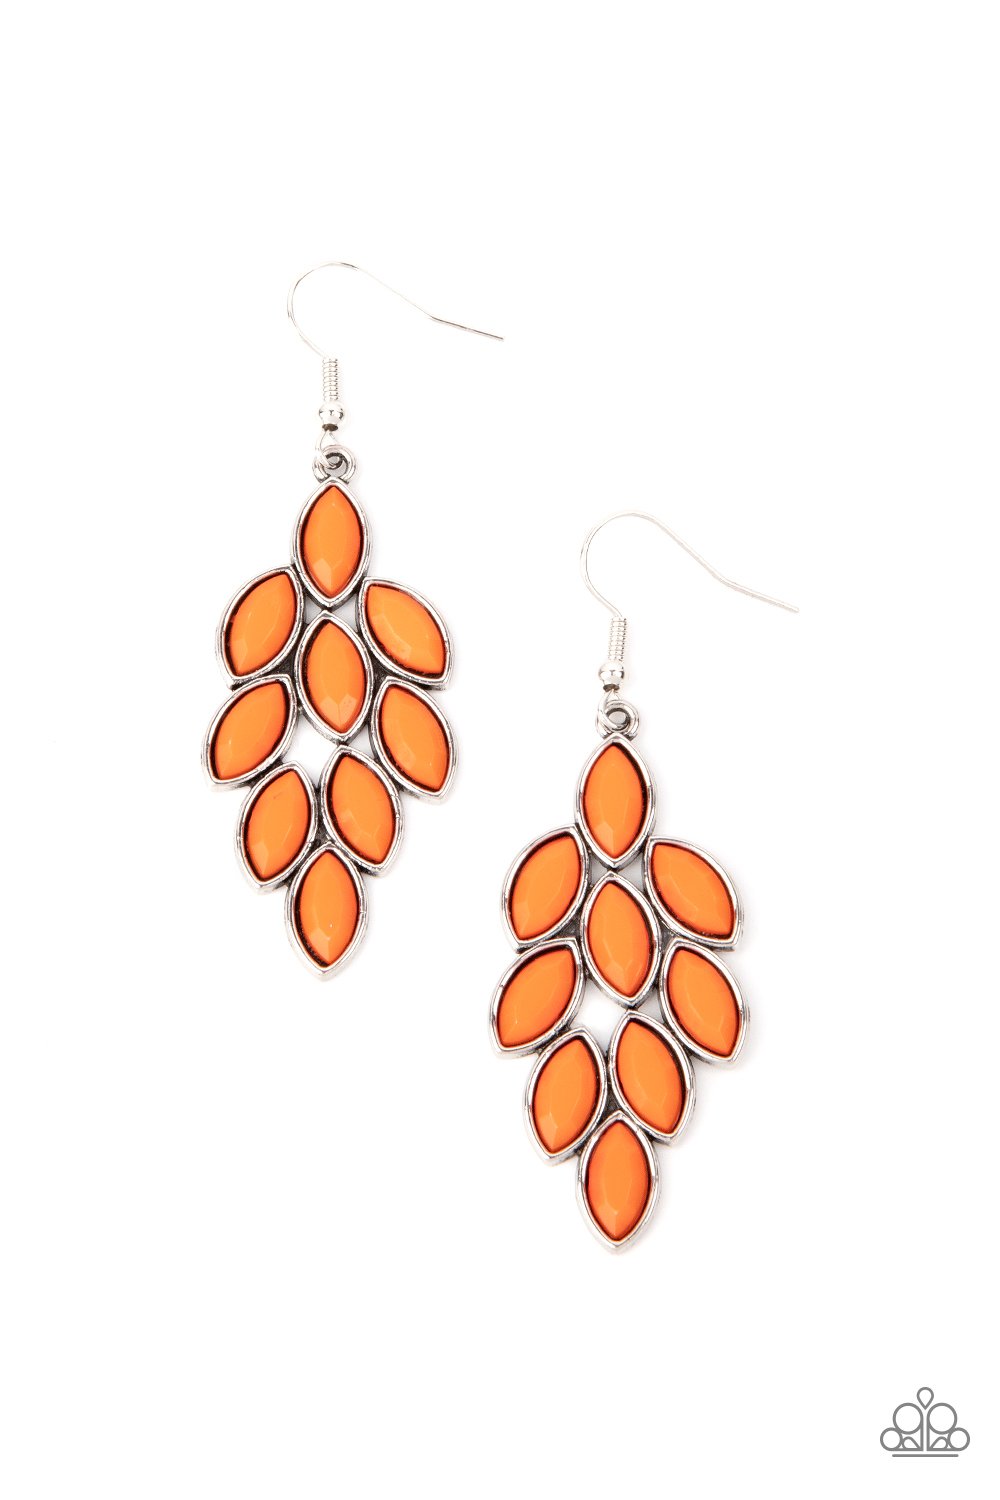 &lt;p&gt;Encased in sleek silver frames, a collection of faceted Marigold beads delicately coalesce into a colorfully leafy lure. Earring attaches to a standard fishhook fitting.
  &lt;/p&gt; 
 
 &lt;p&gt; &lt;i&gt; Sold as one pair of earrings. &lt;/i&gt; &lt;/p&gt;
 
 &lt;img src=\&quot;https://d9b54x484lq62.cloudfront.net/paparazzi/shopping/images/517_tag150x115_1.png\&quot; alt=\&quot;New Kit\&quot; align=\&quot;middle\&quot; height=\&quot;50\&quot; width=\&quot;50\&quot;&gt;